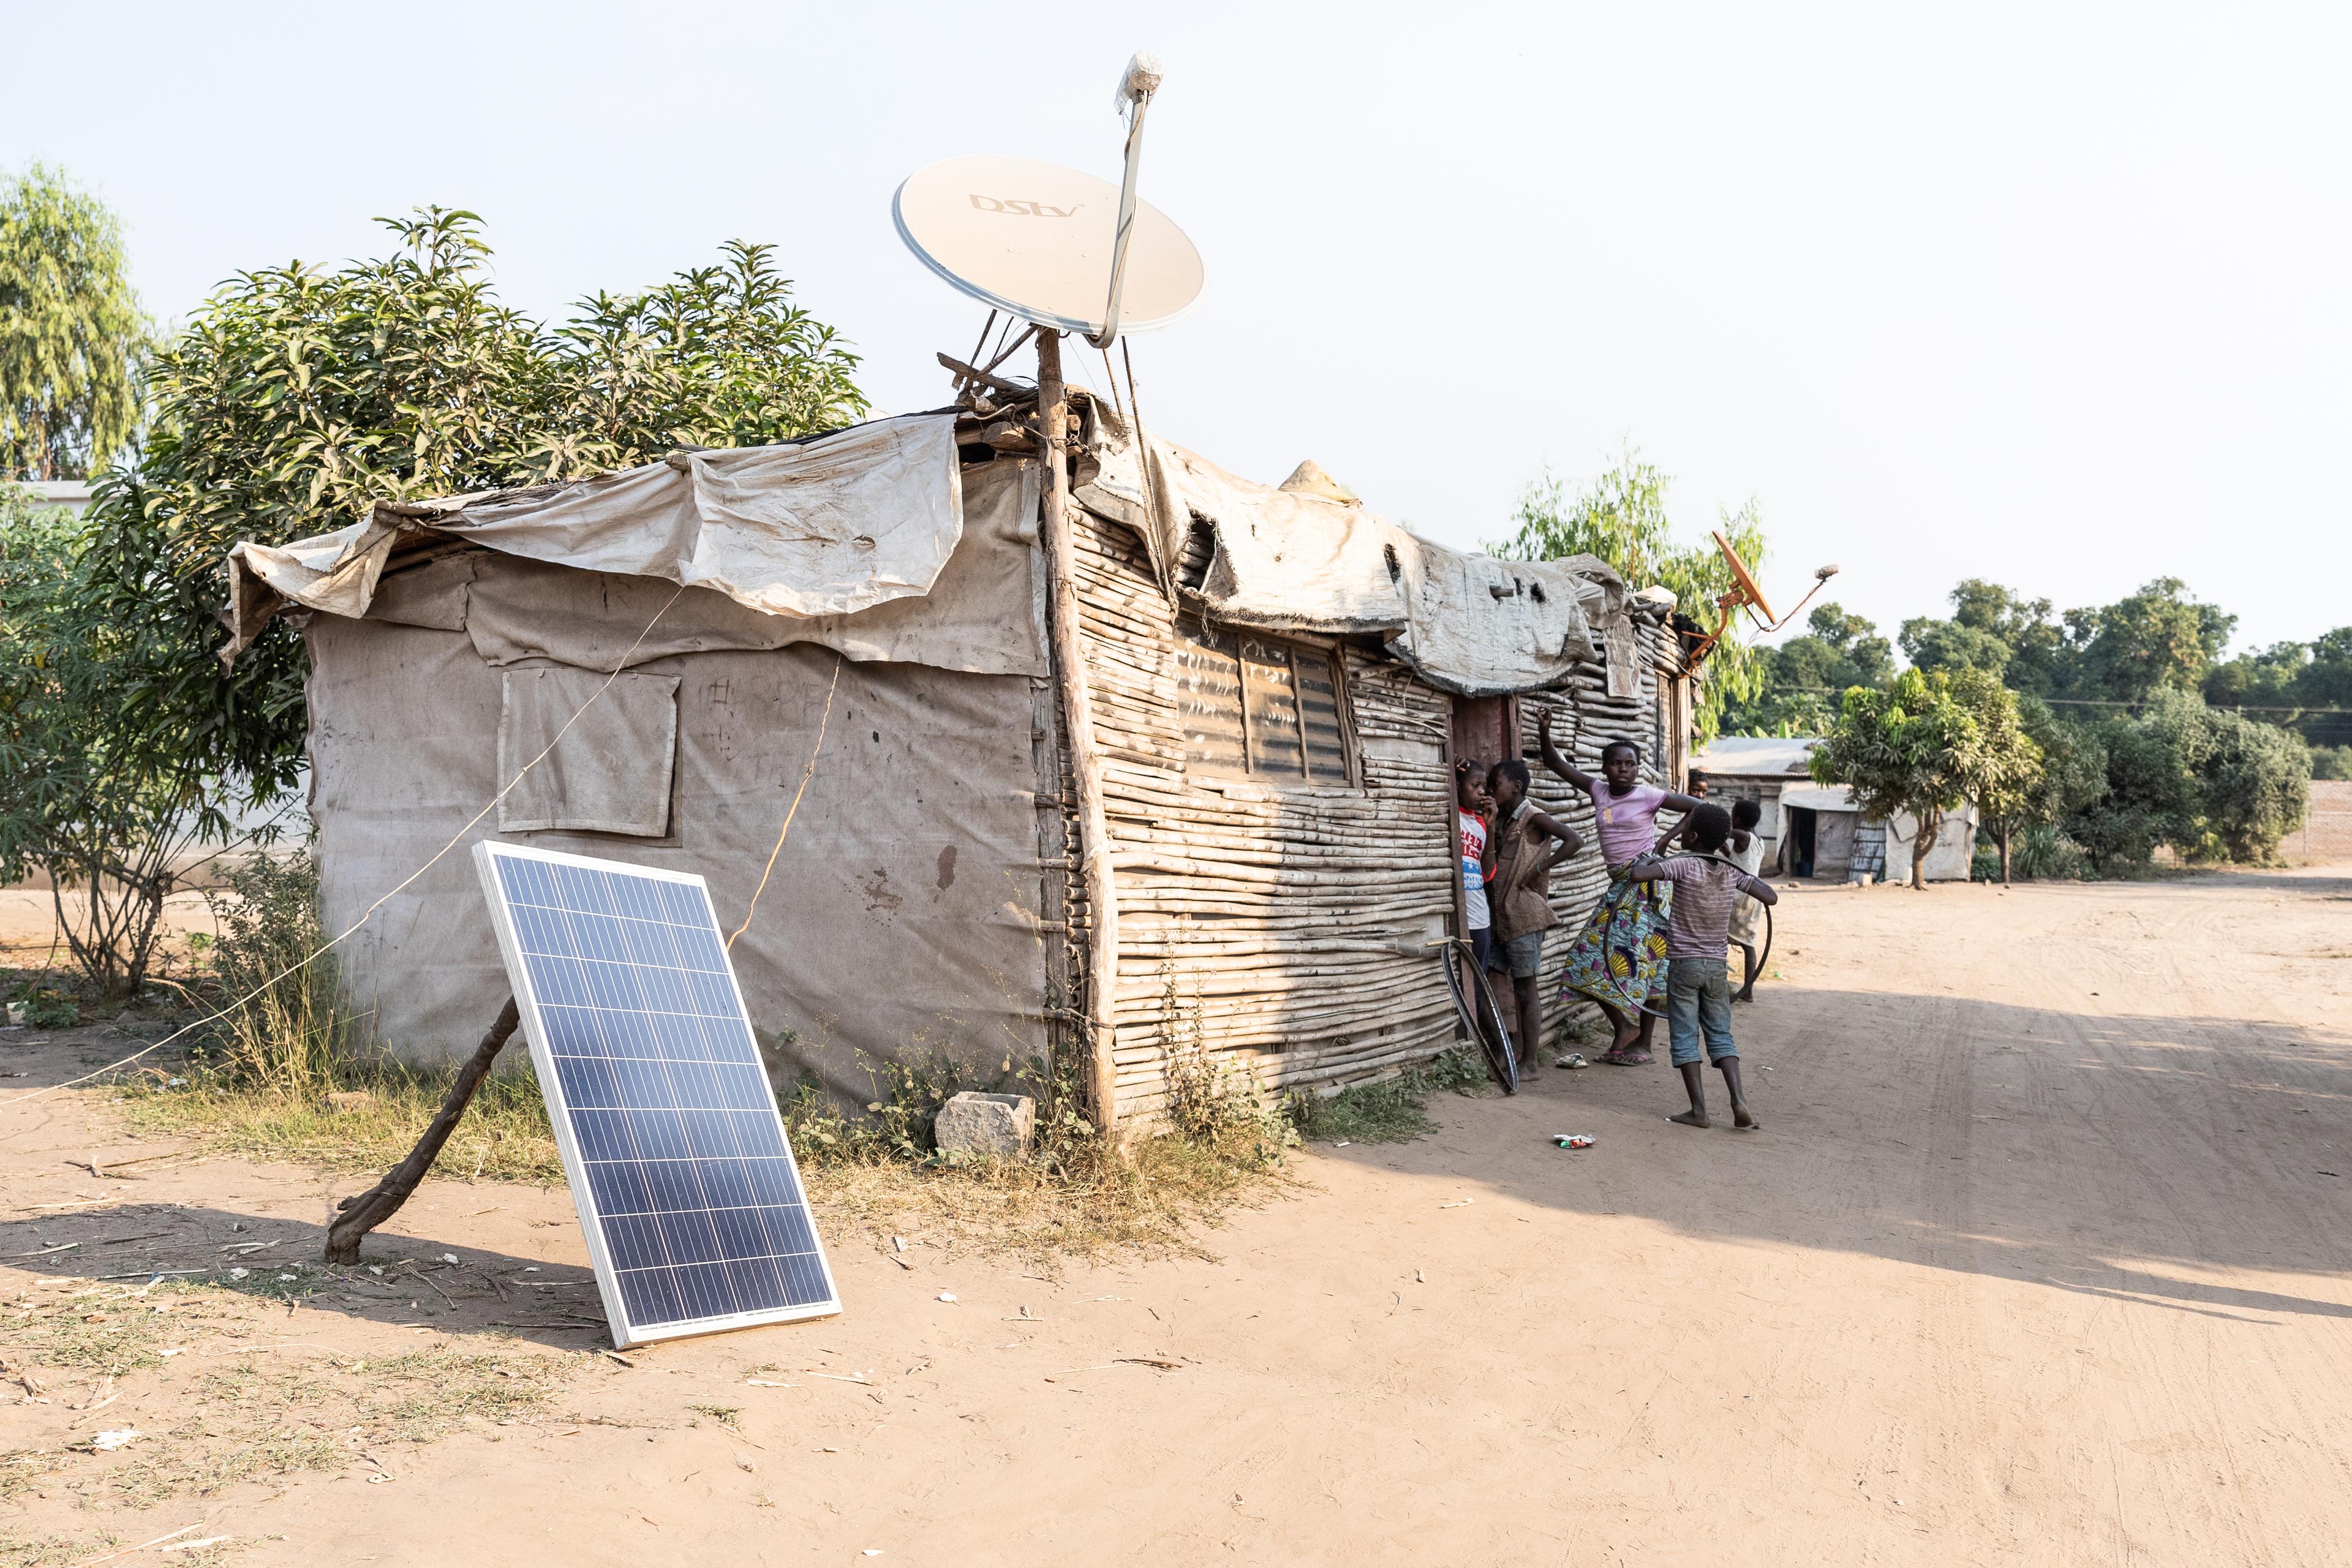 Solar panel in refugee context